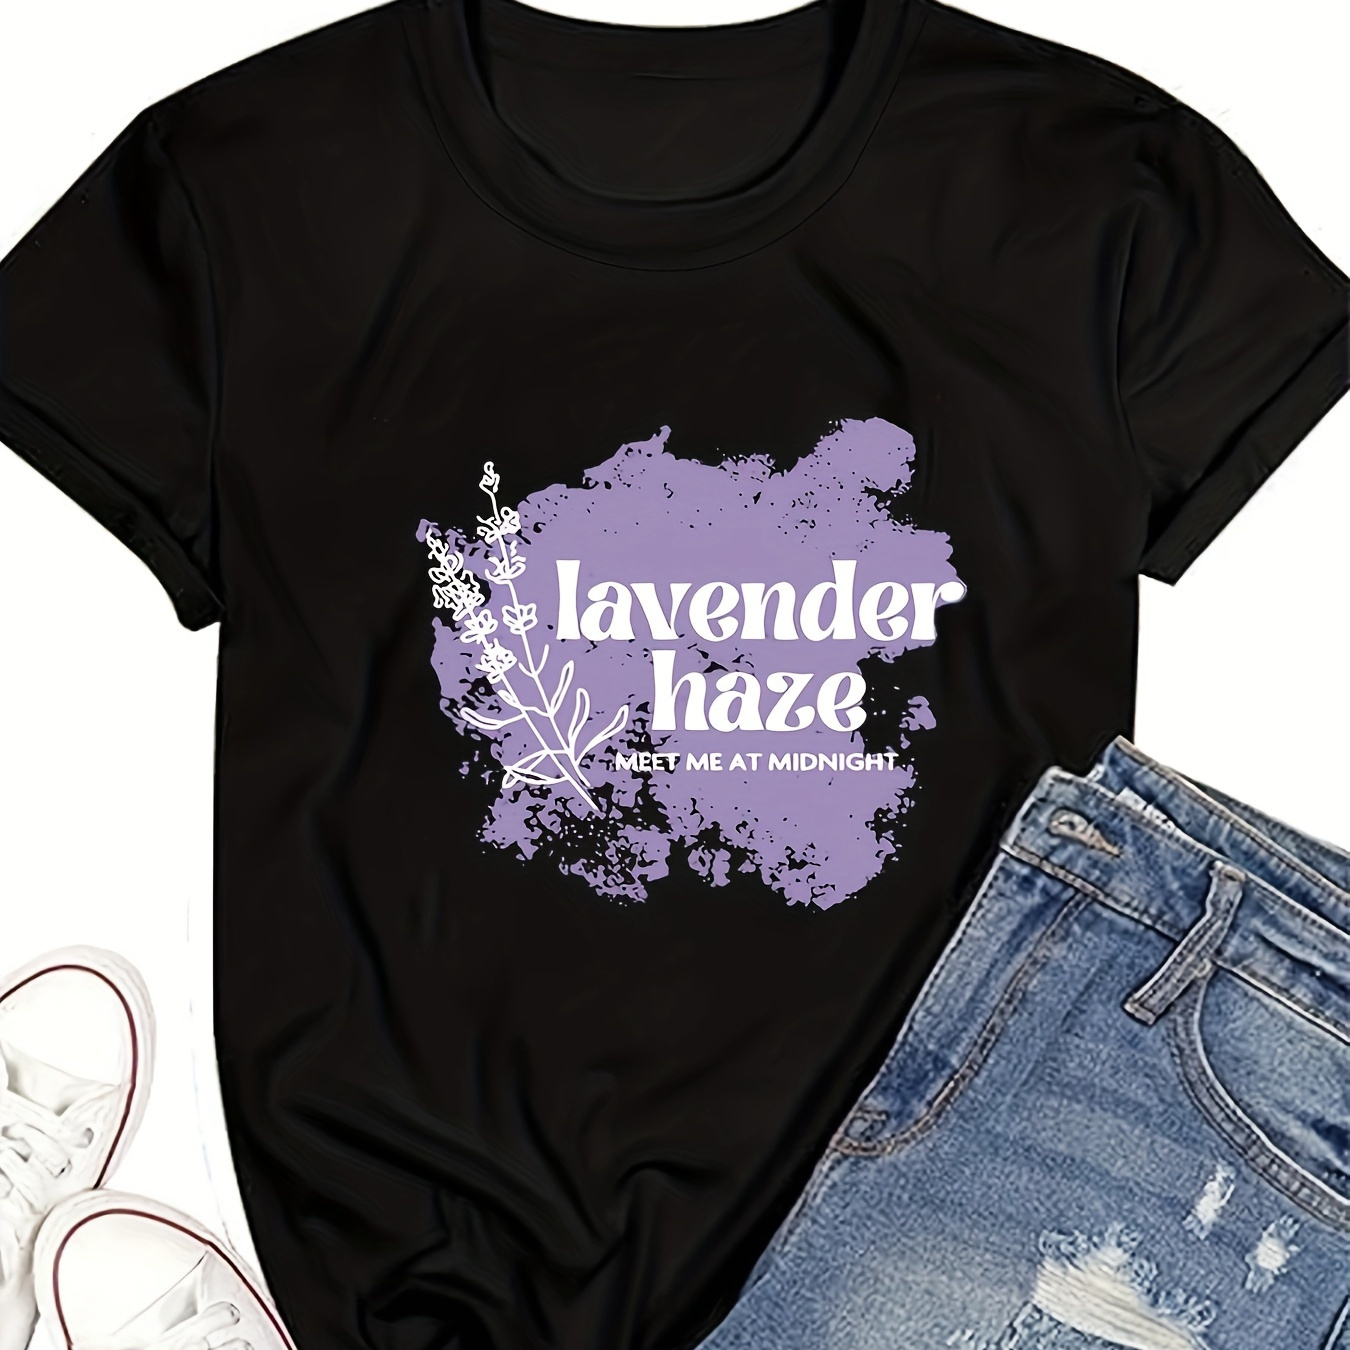 

Lavender Print T-shirt, Casual Crew Neck Short Sleeve Top For Spring & Summer, Women's Clothing